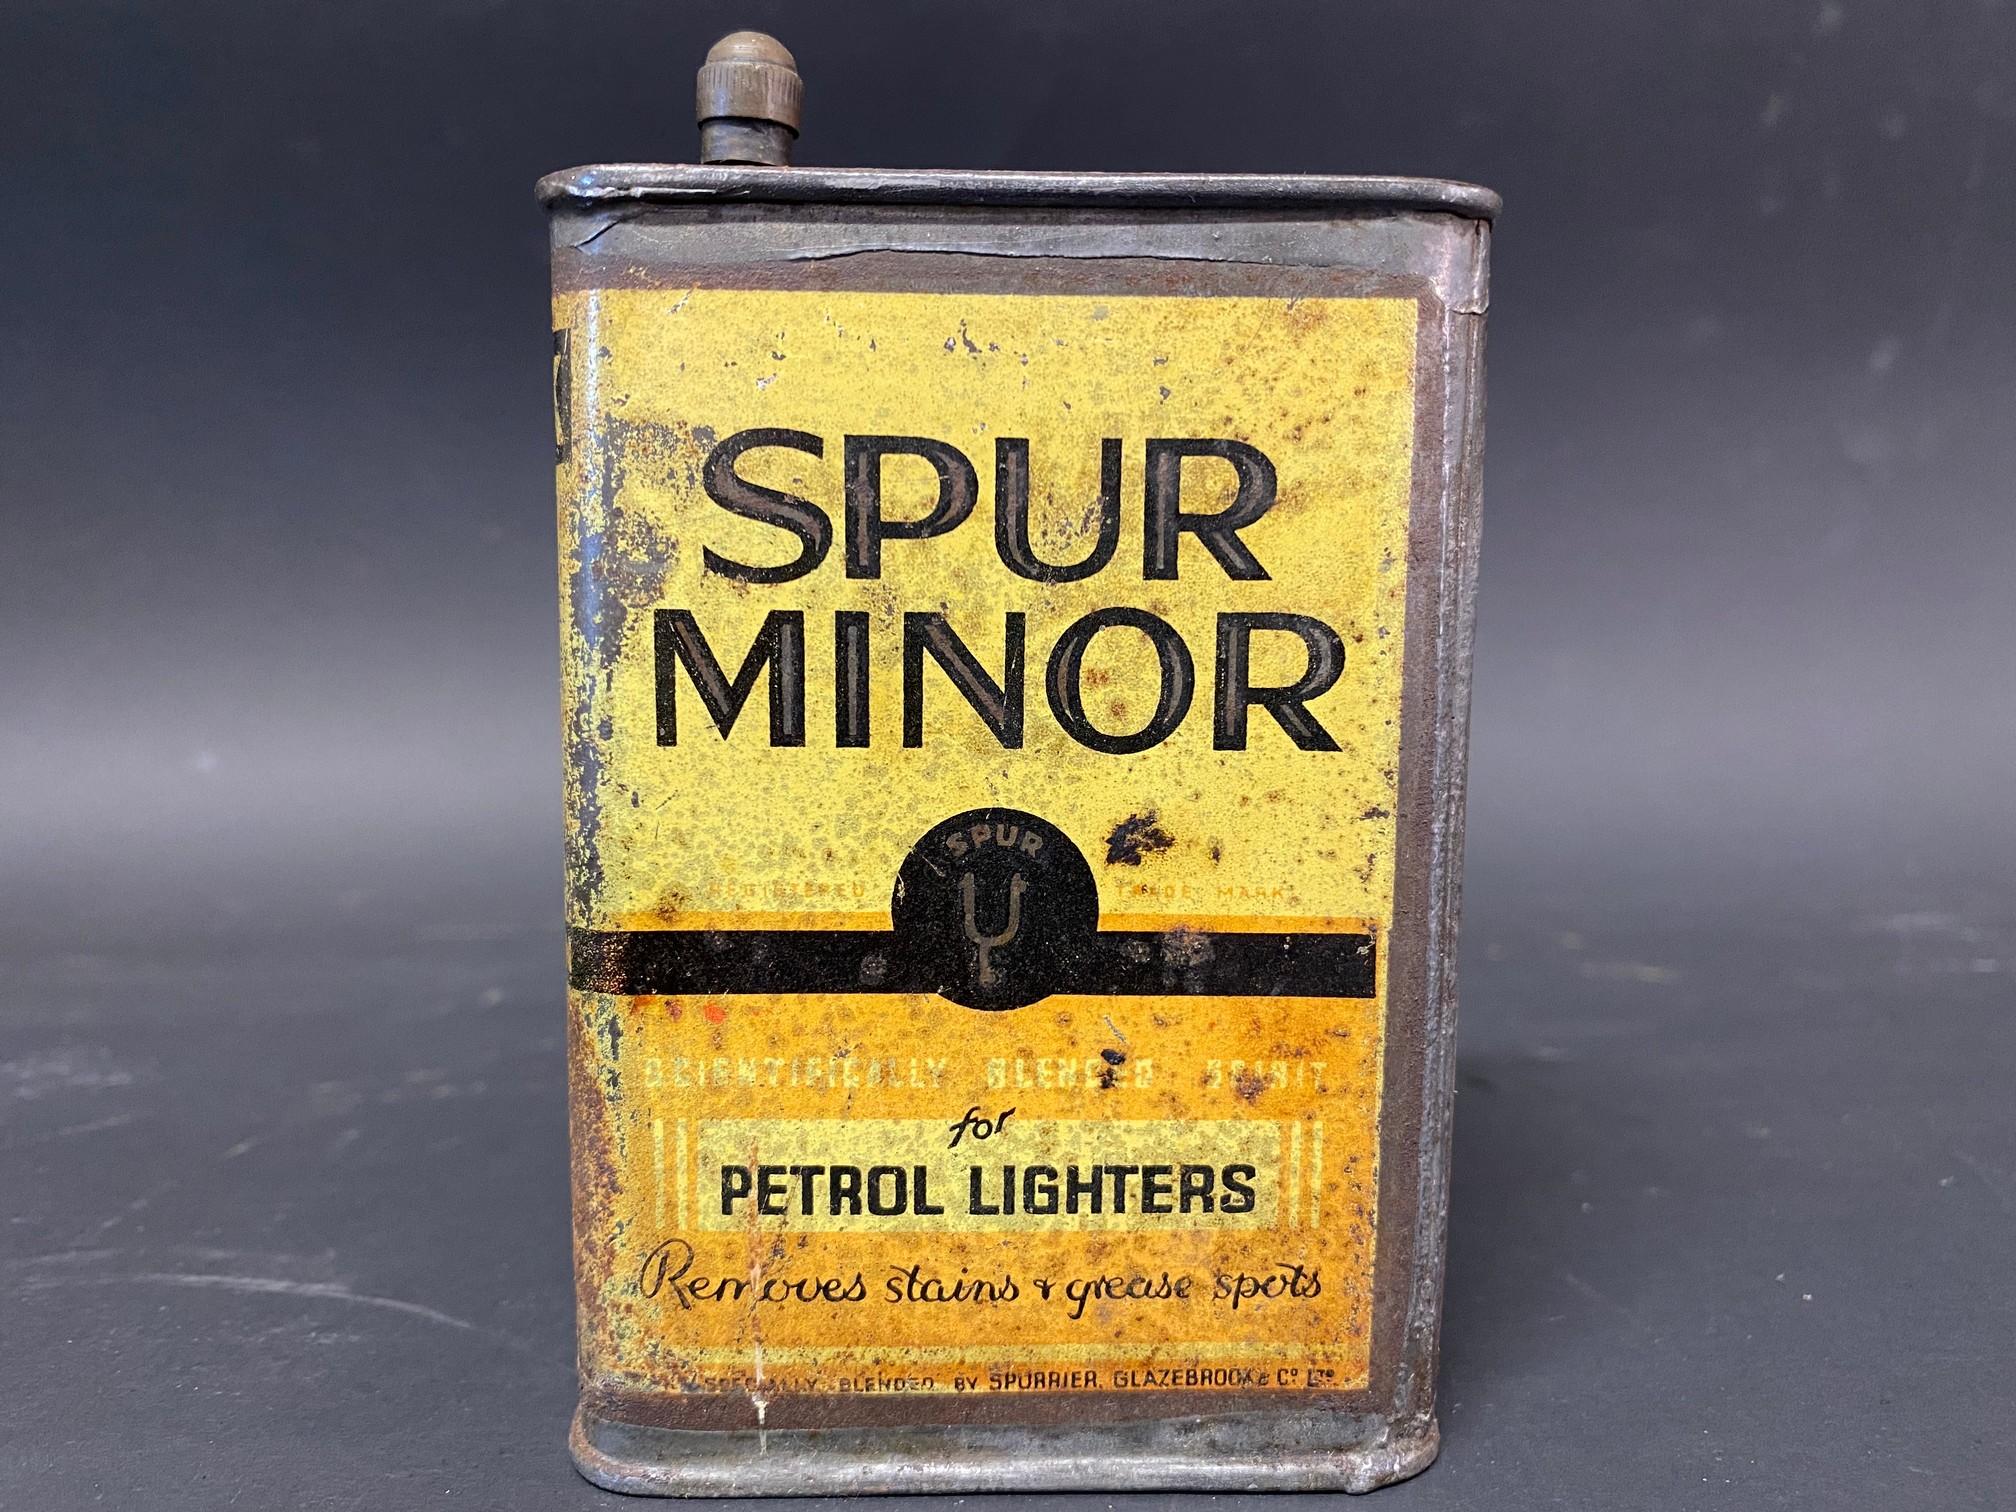 A small Spur Minor petrol lighters fuel tin.